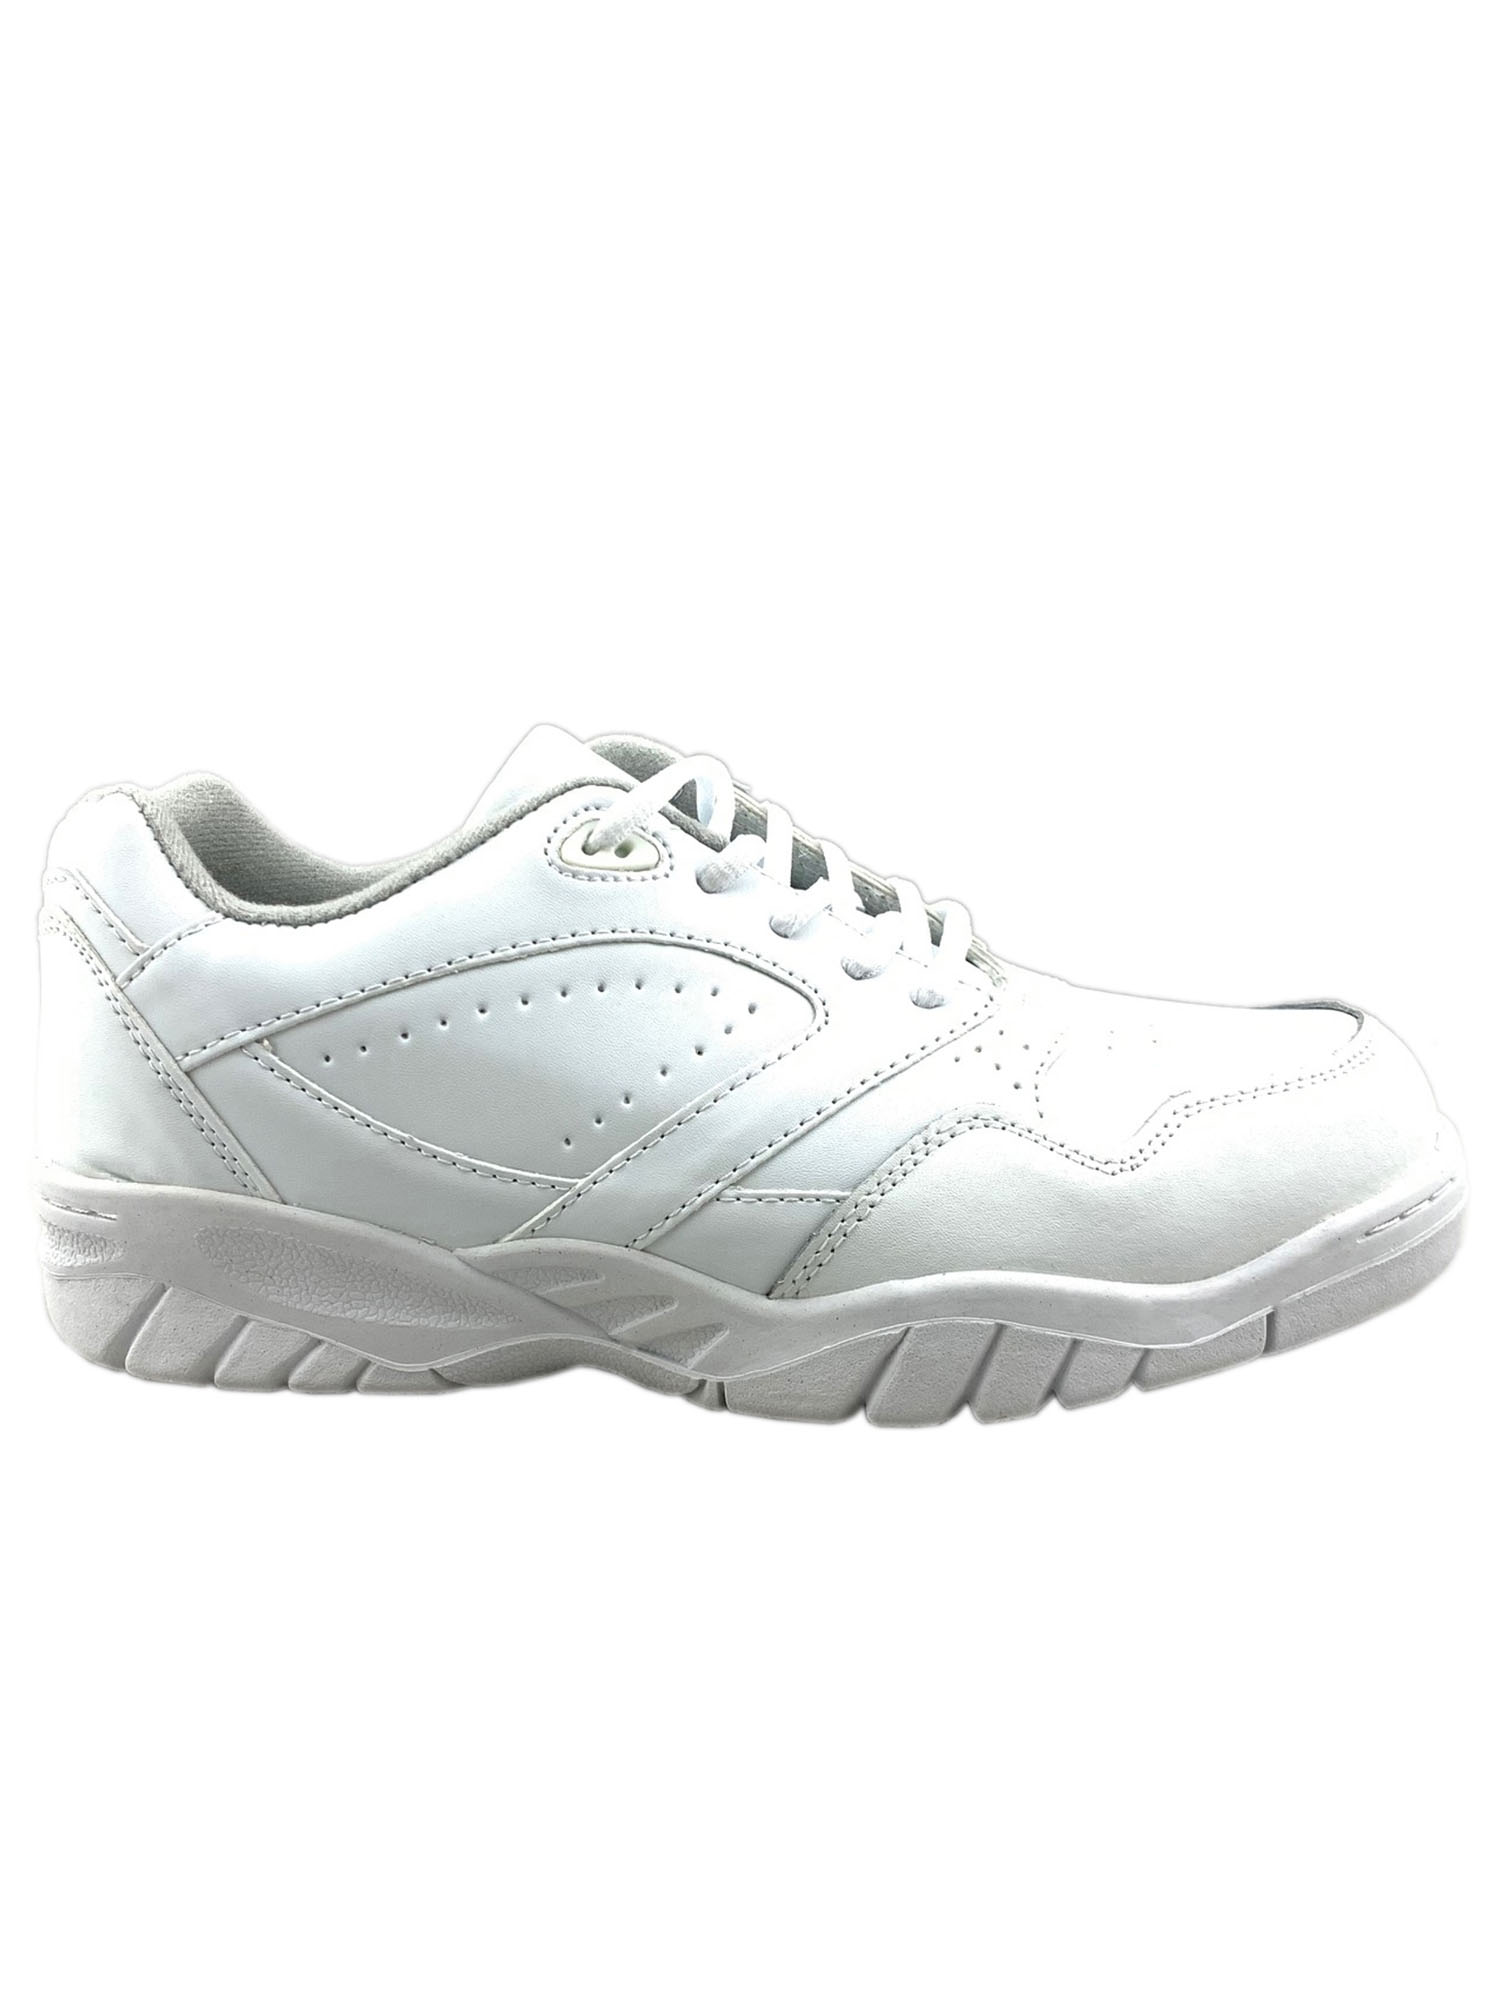 Tanleewa Men's Leather White Sports Shoes Lightweight Sneakers Breathable Casual Shoe Size 16 - image 1 of 5